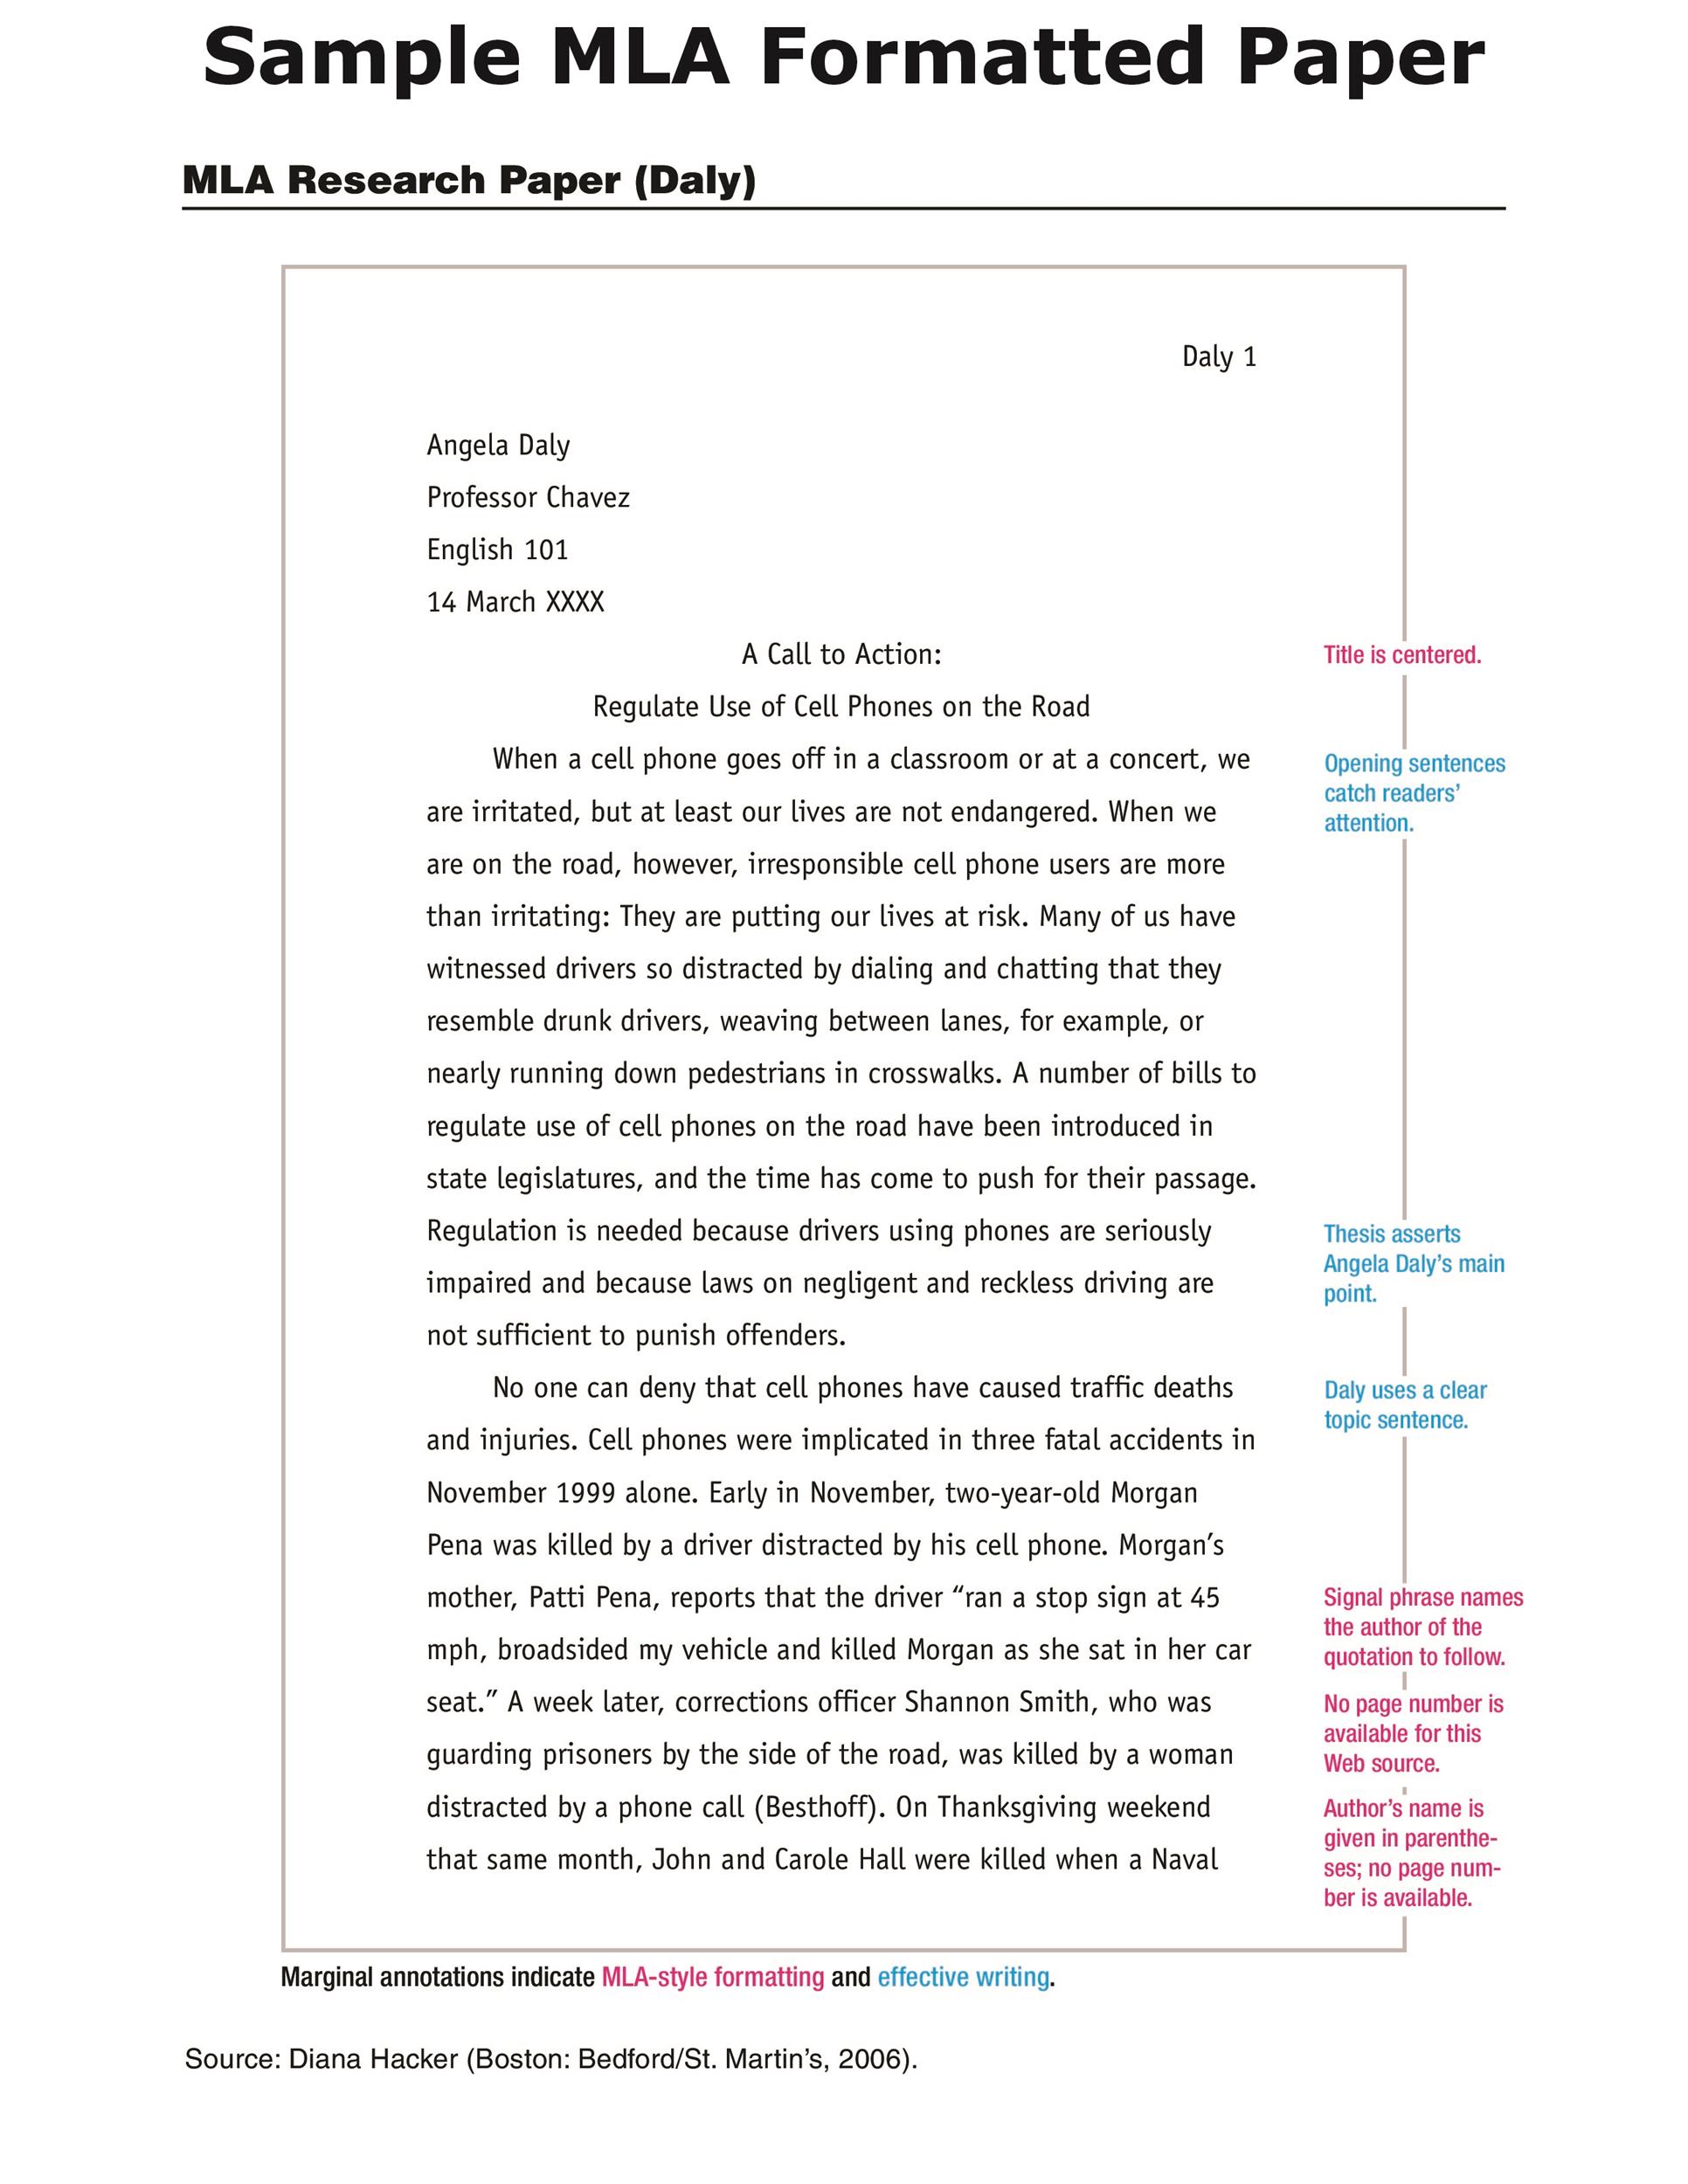 How to Style Essays Using MLA Format | EssayPro